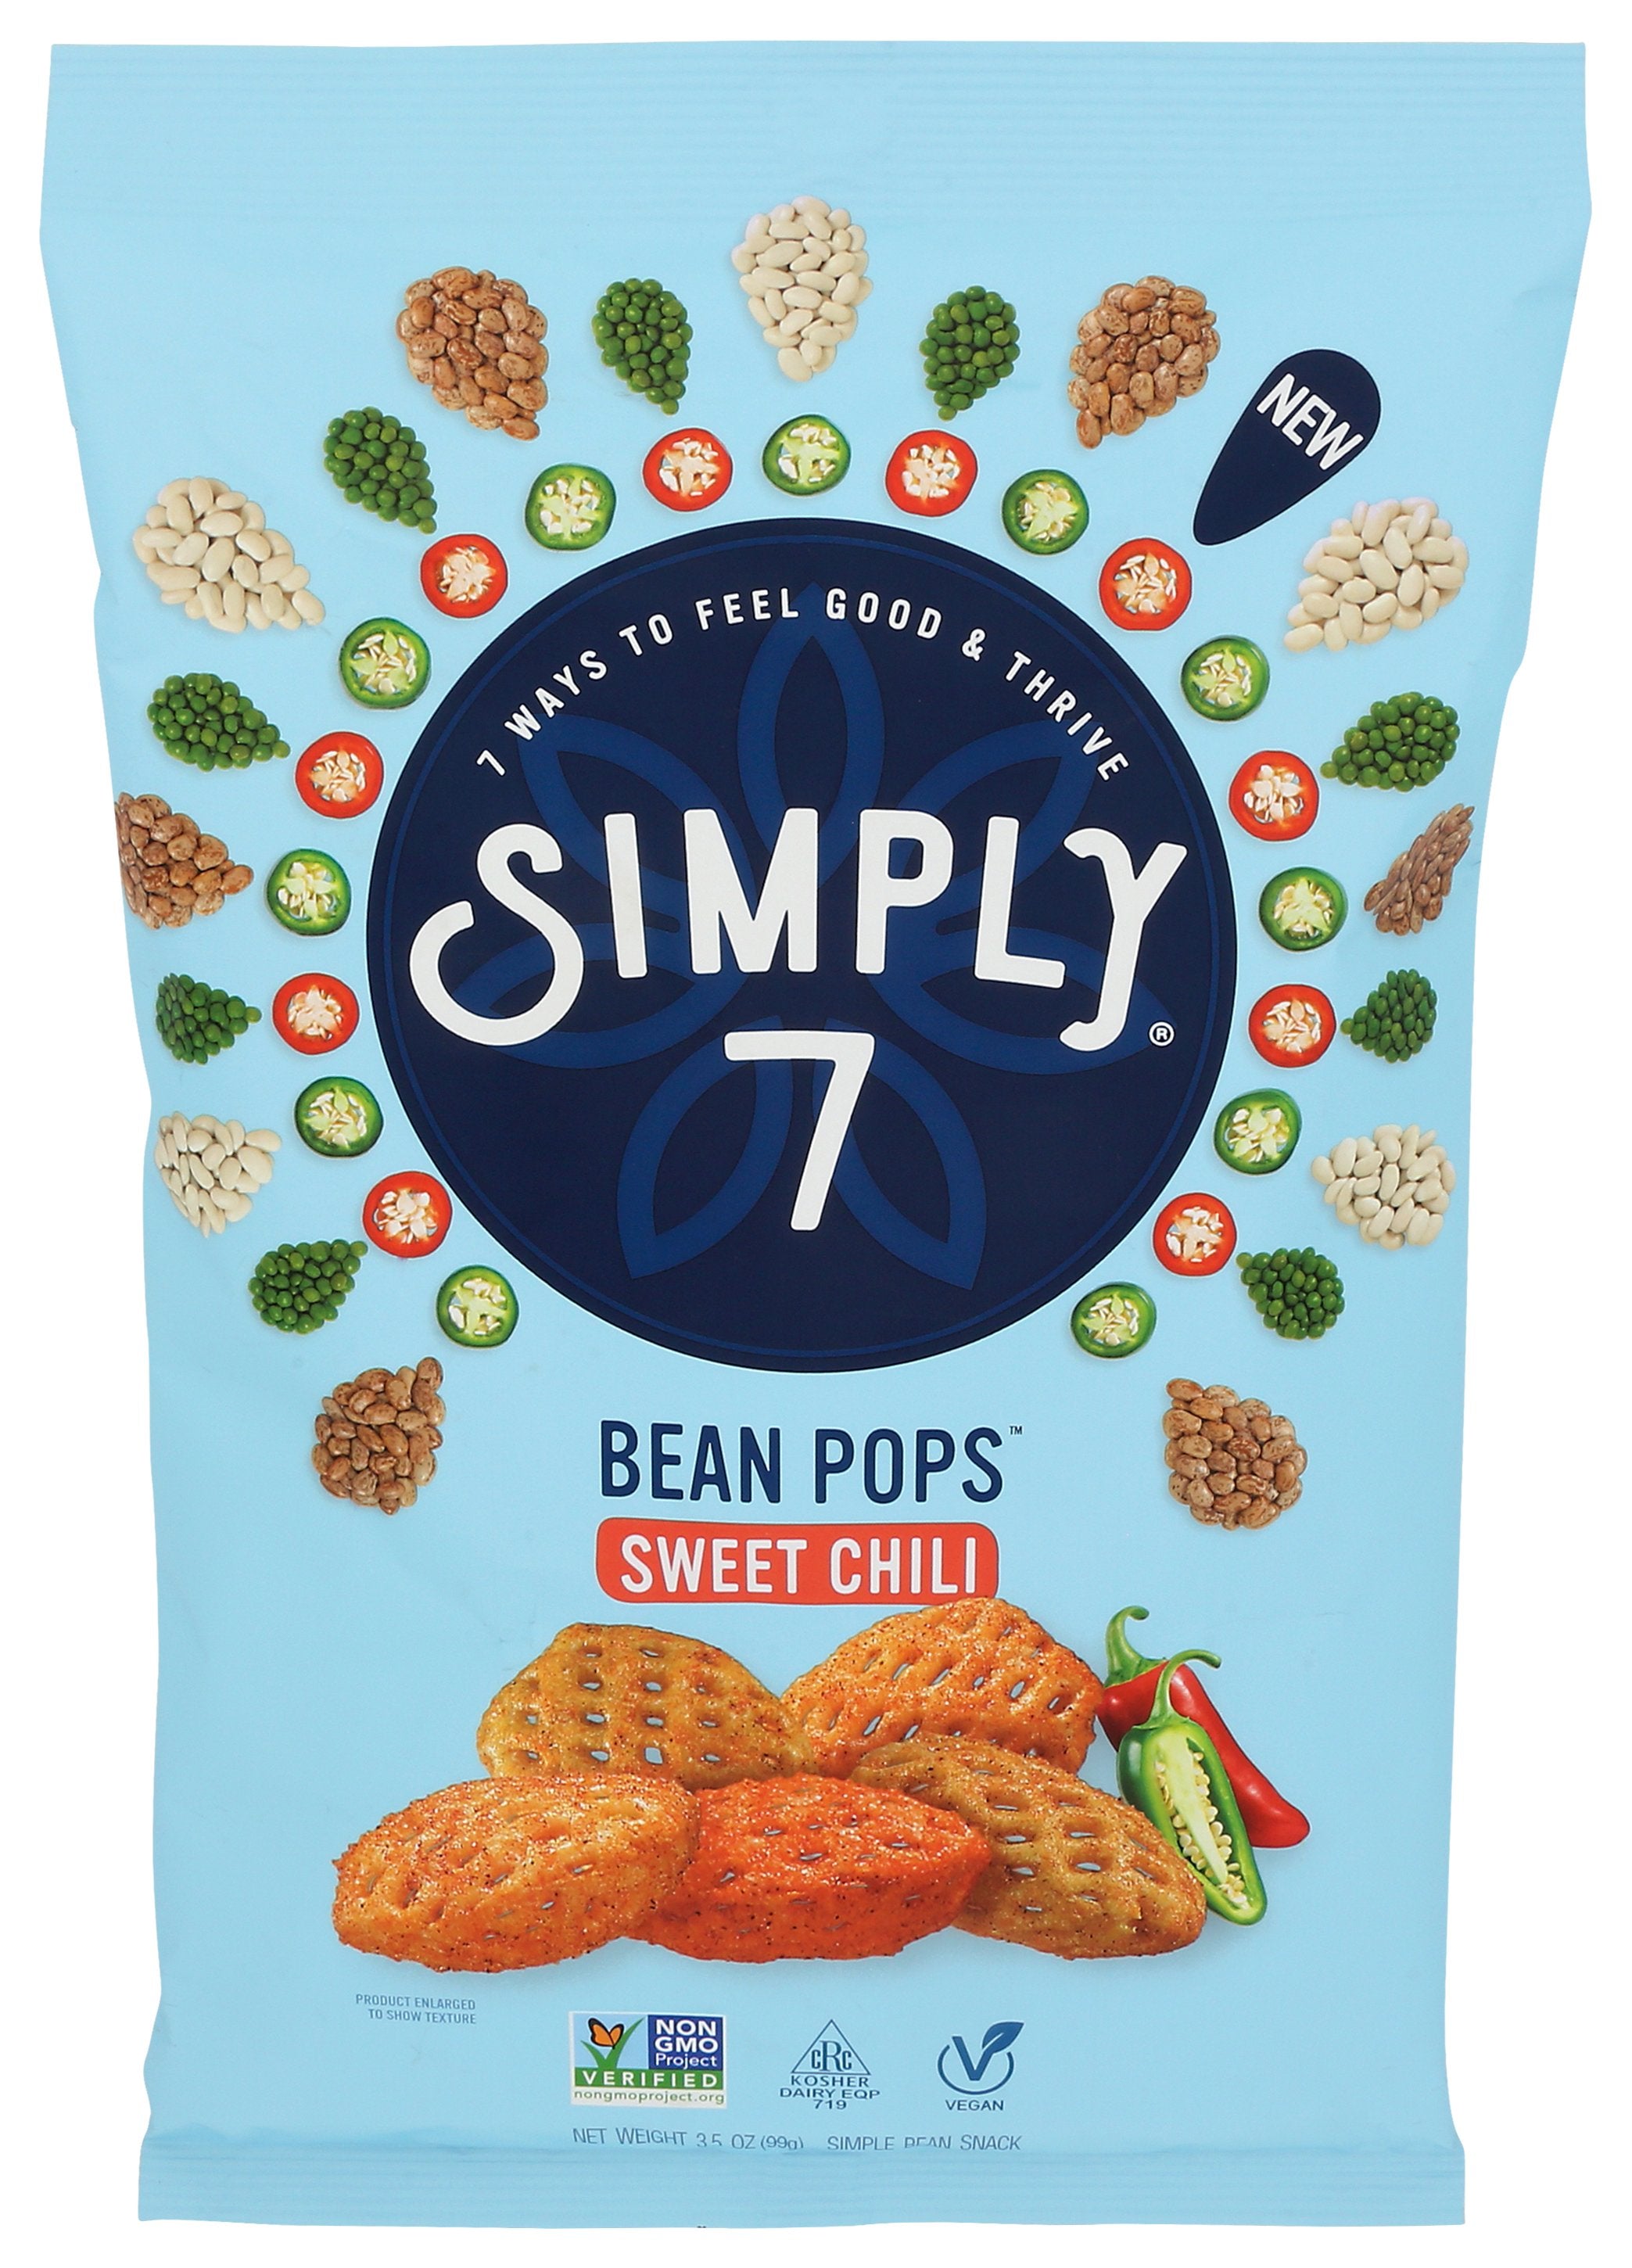 SIMPLY 7 BEAN POPS SWEET CHILI - Case of 8